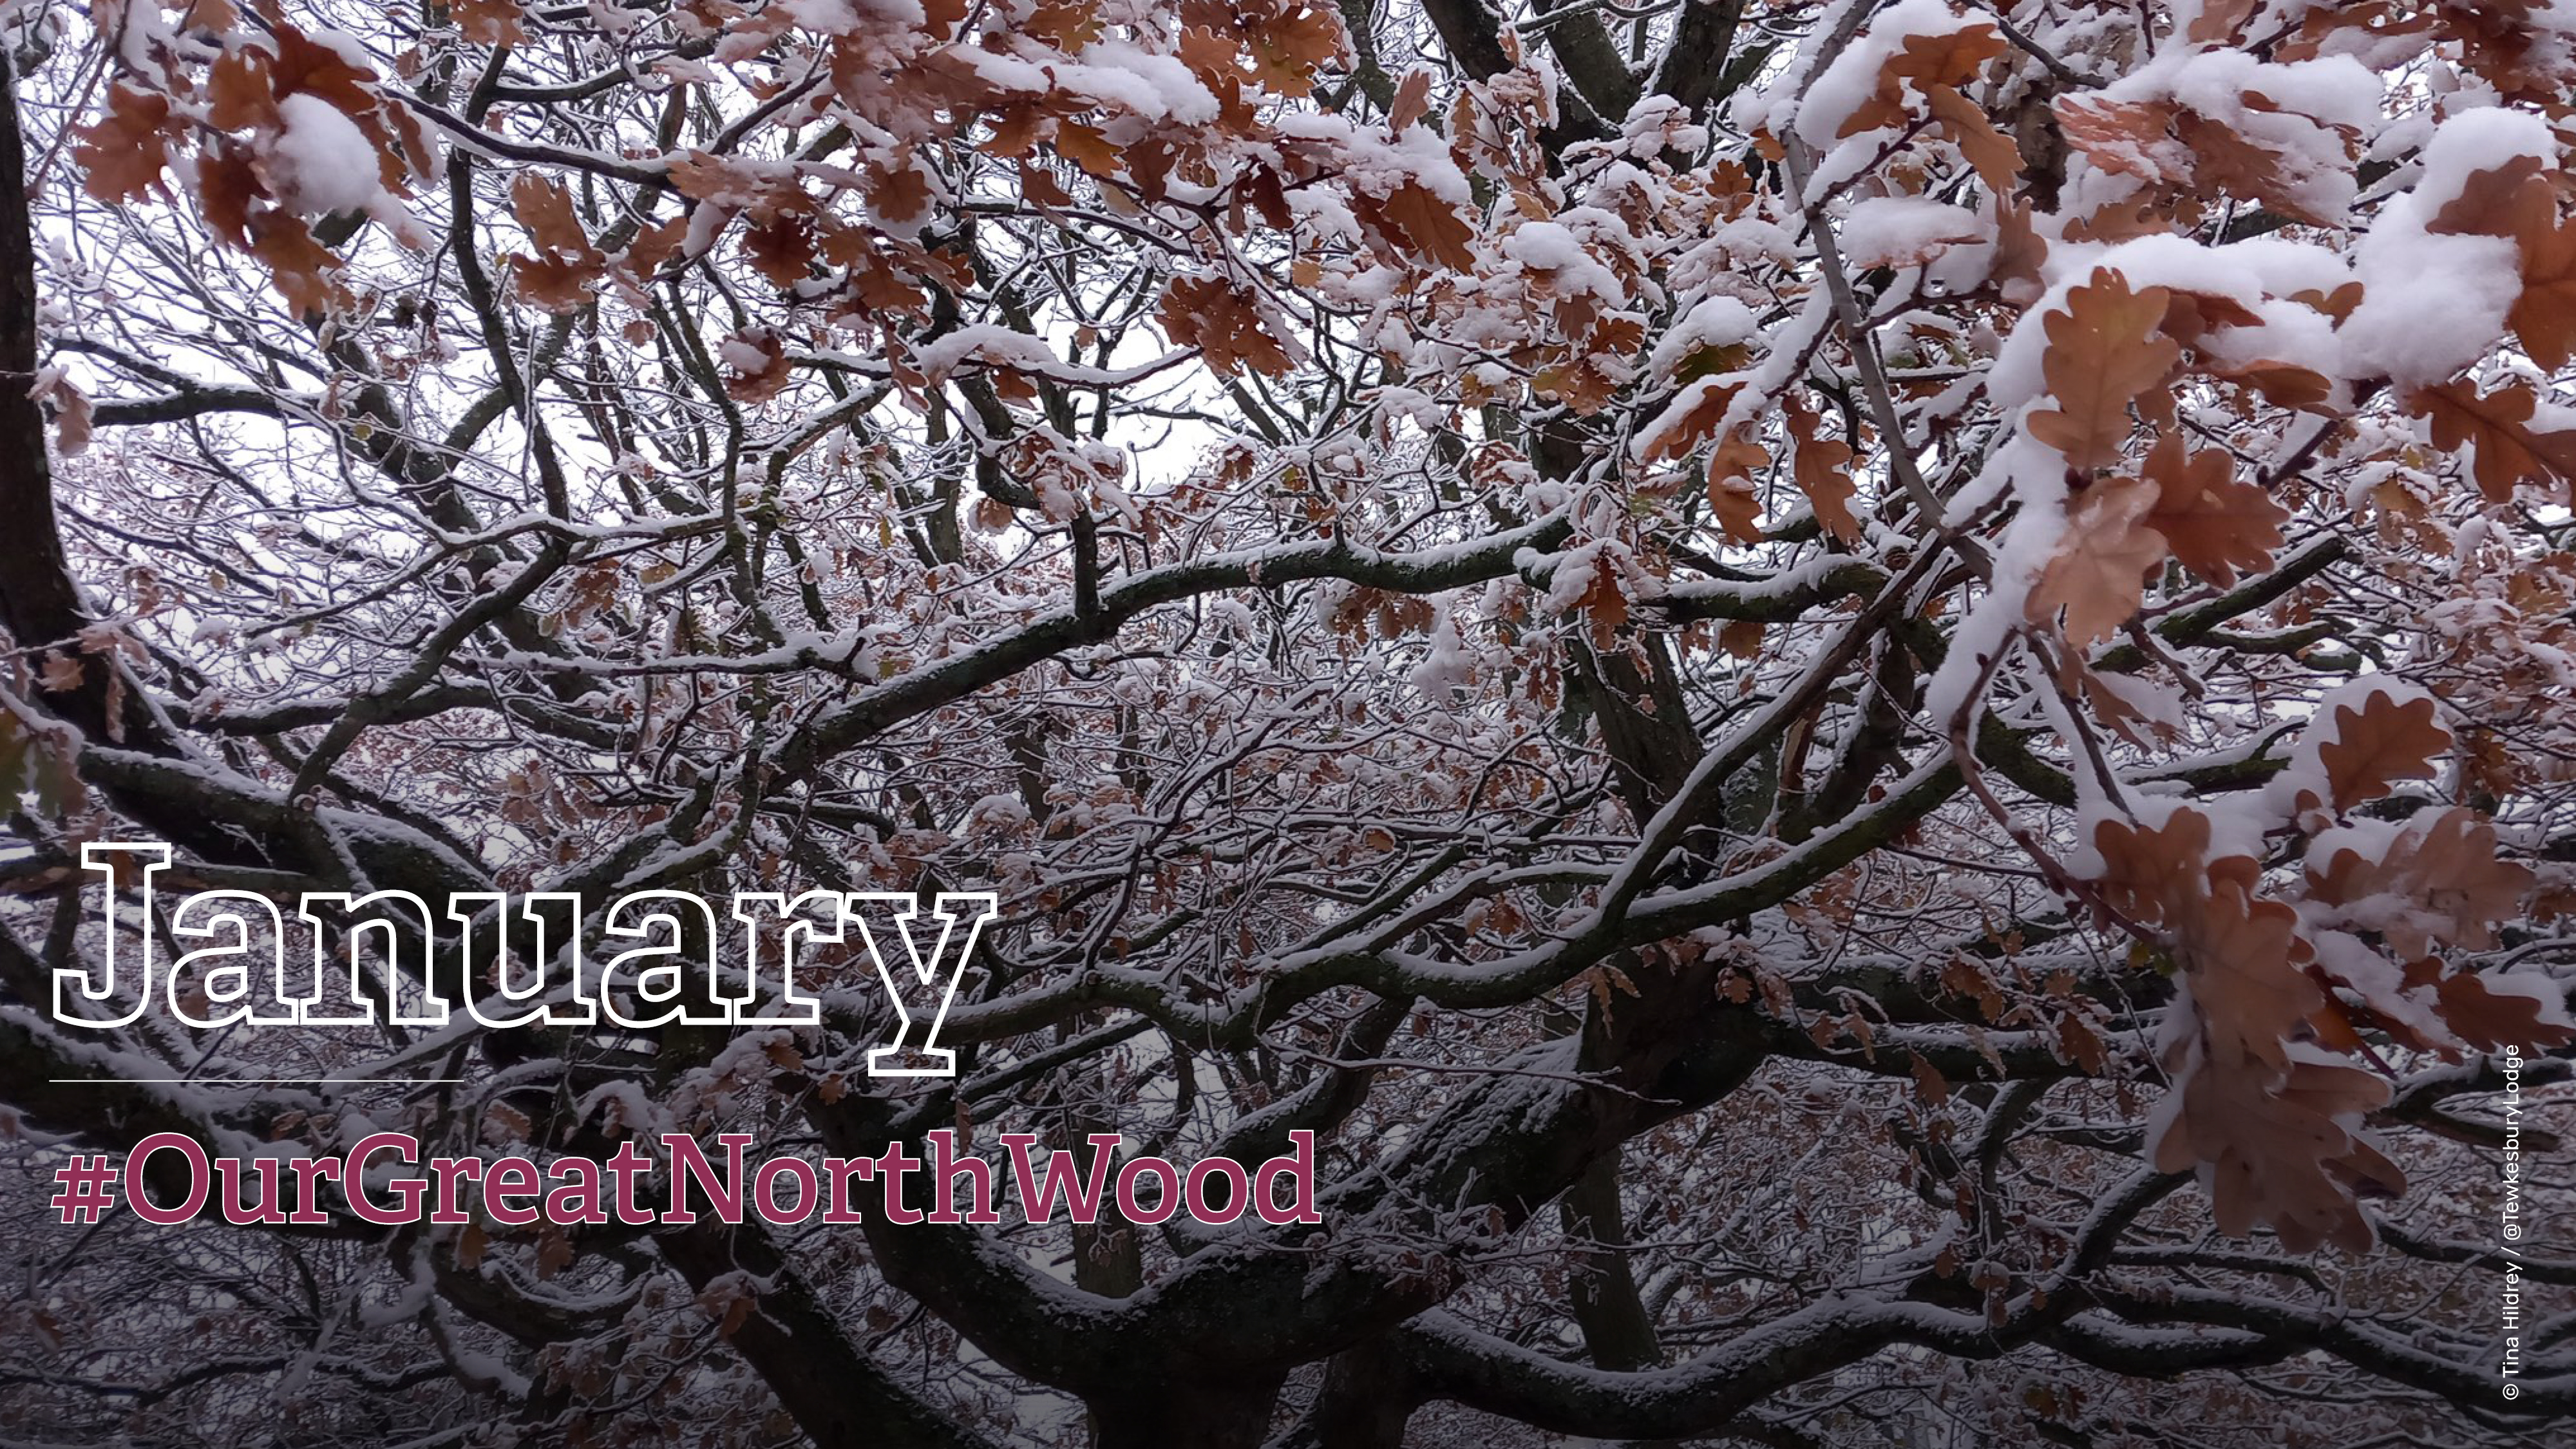 January winner of the Great North Wood photography competition - Tina Hildrey, @TewkesburyLodge